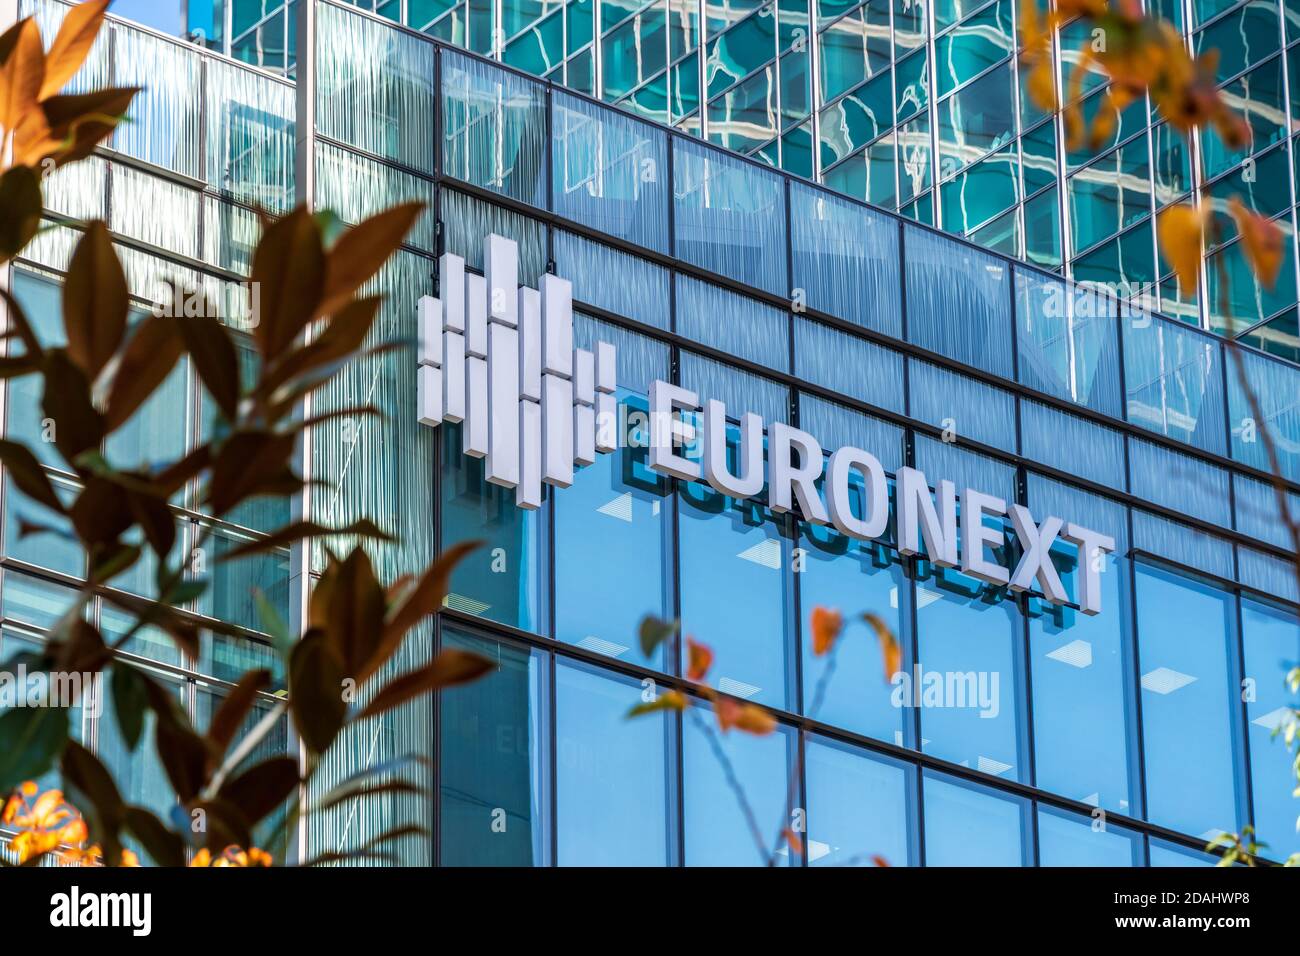 Courbevoie, France - November 12, 2020: Exterior view of the Euronext building in the business district of Paris La Défense Stock Photo